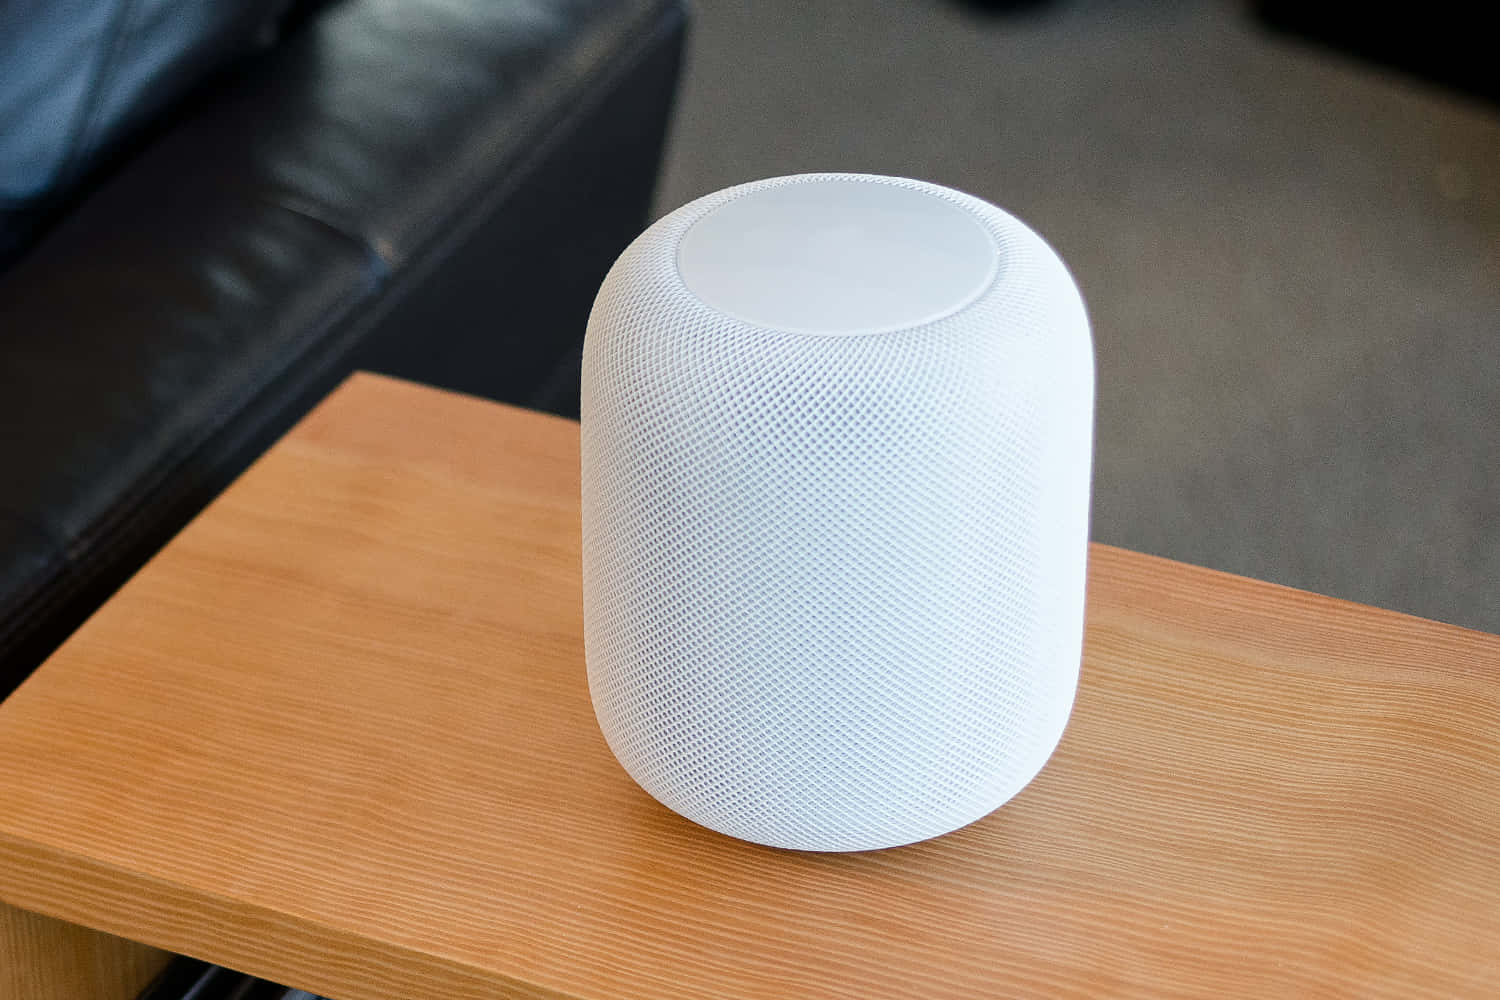 Sleek And Modern Apple Homepod On A Wooden Table Wallpaper